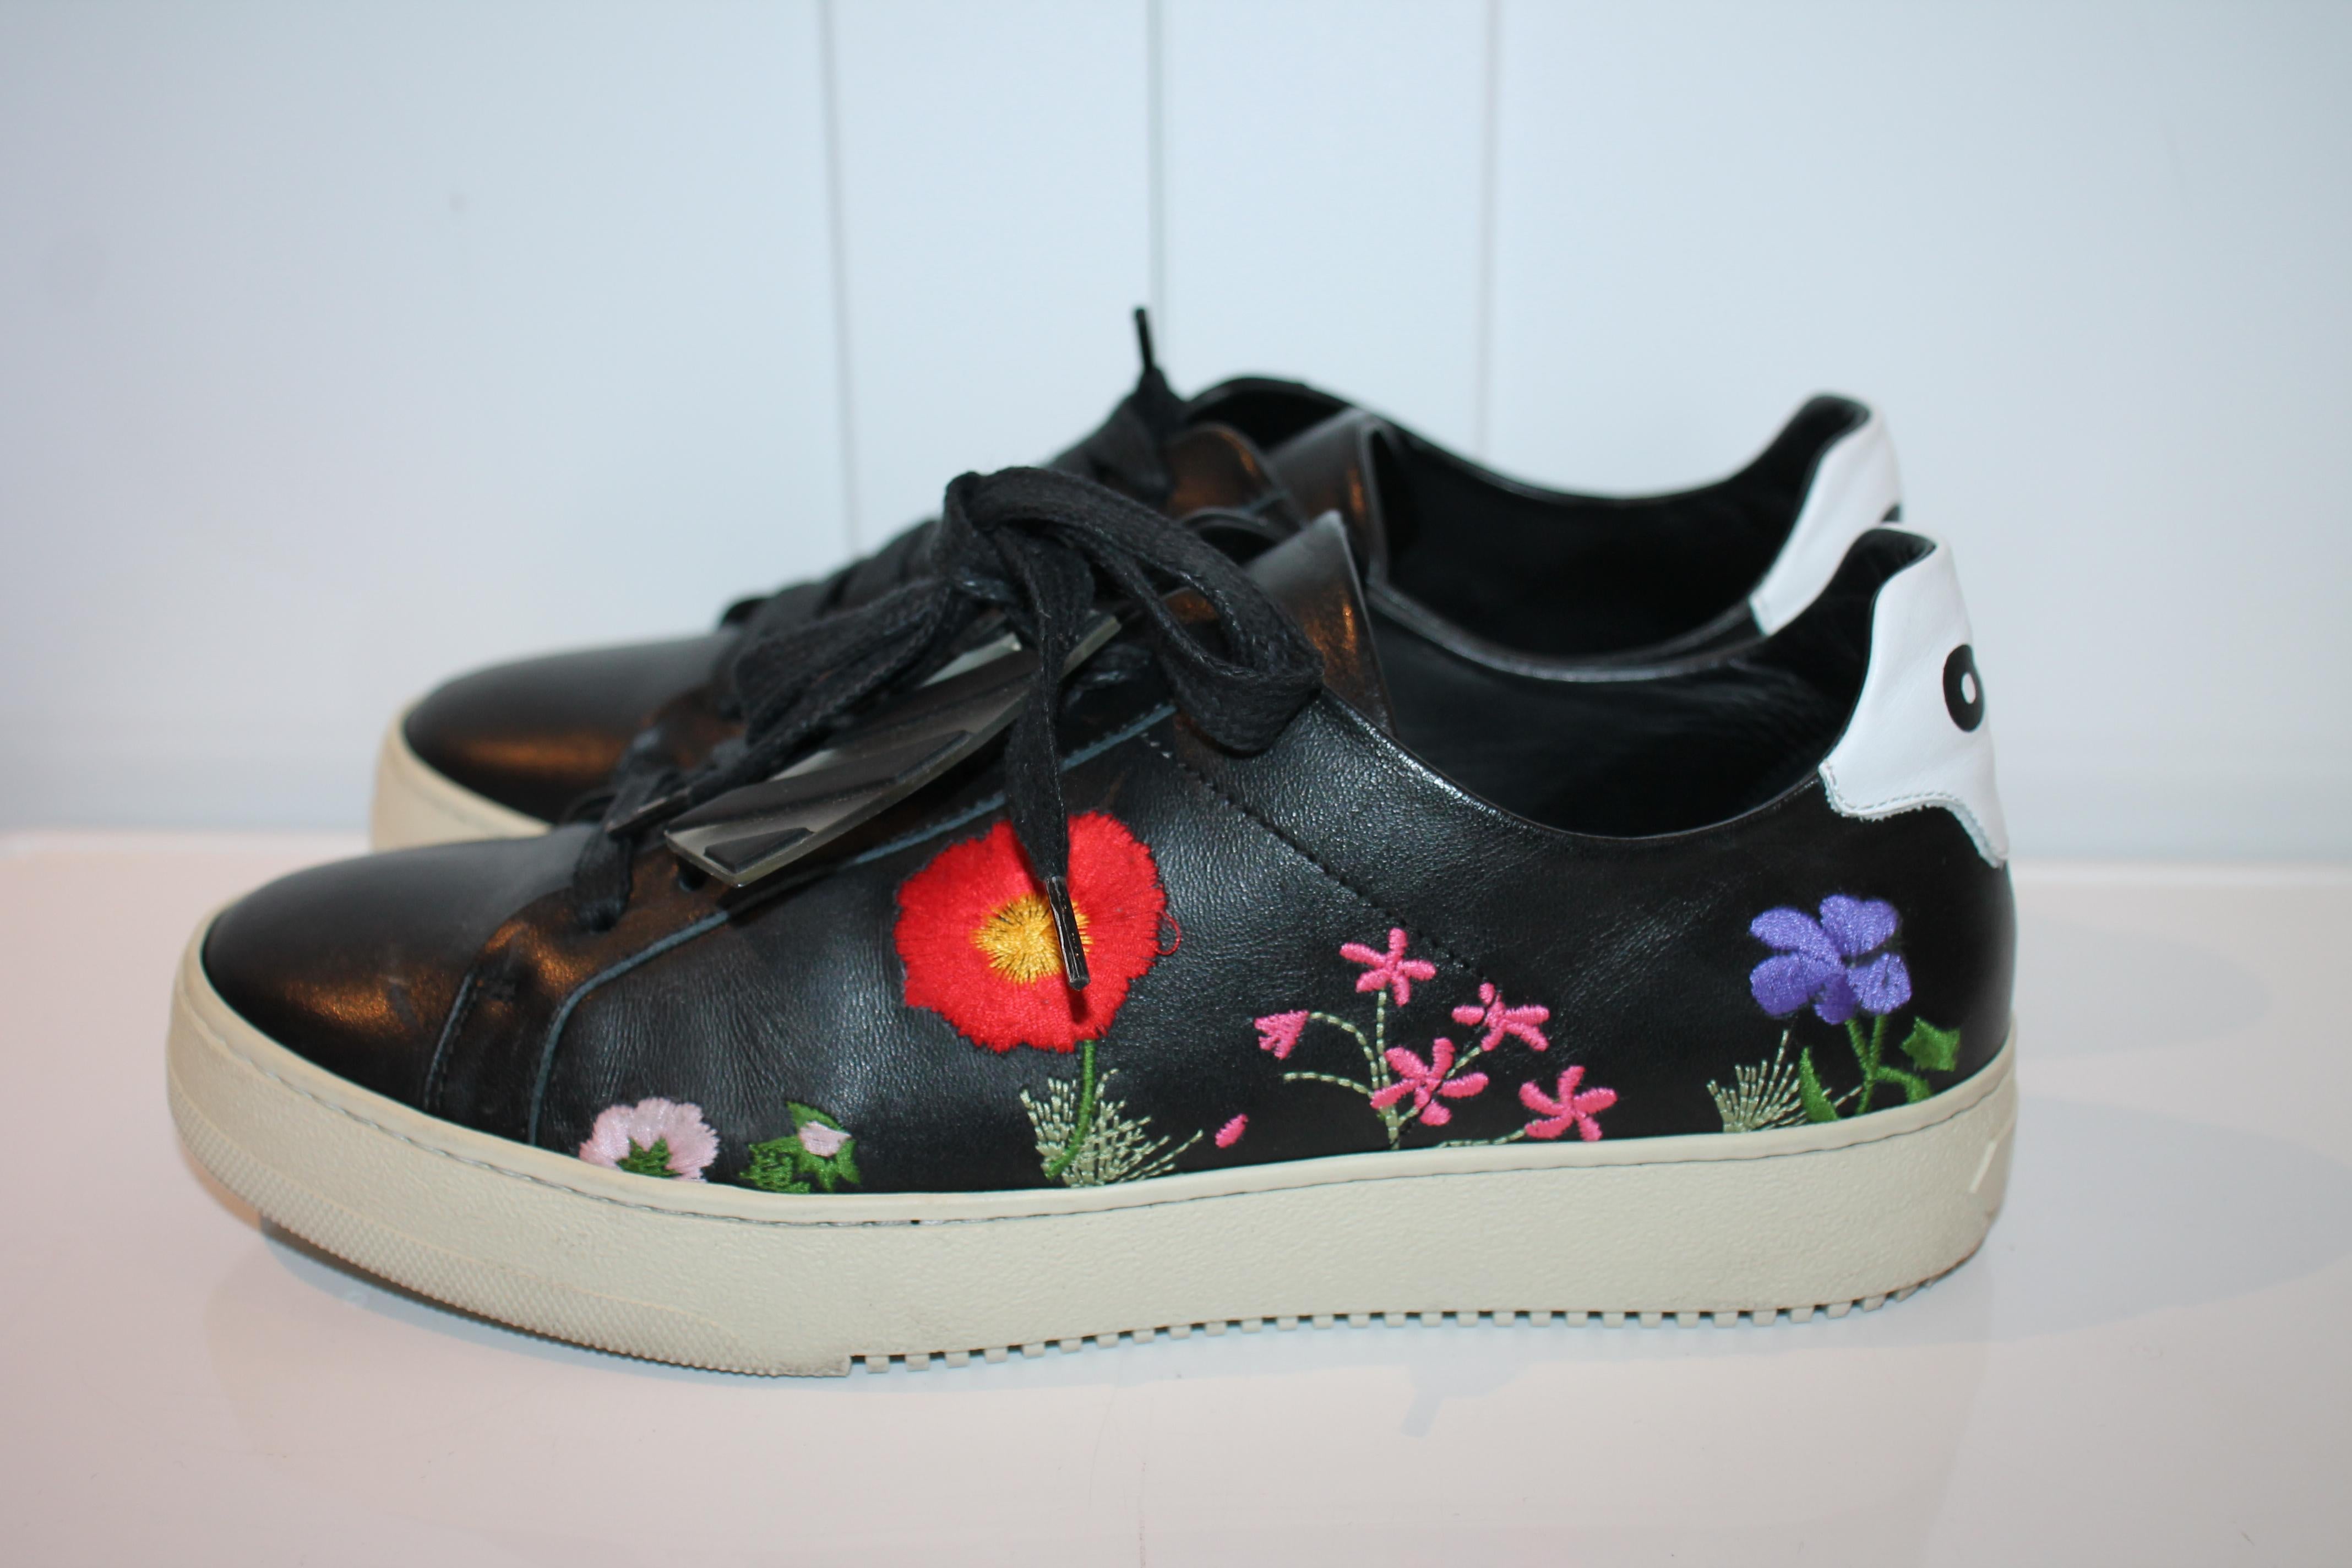 OFF WHITE x Virgil Abloh Floral-Embroidered Low-Top Sneakers In Good Condition For Sale In Roslyn, NY